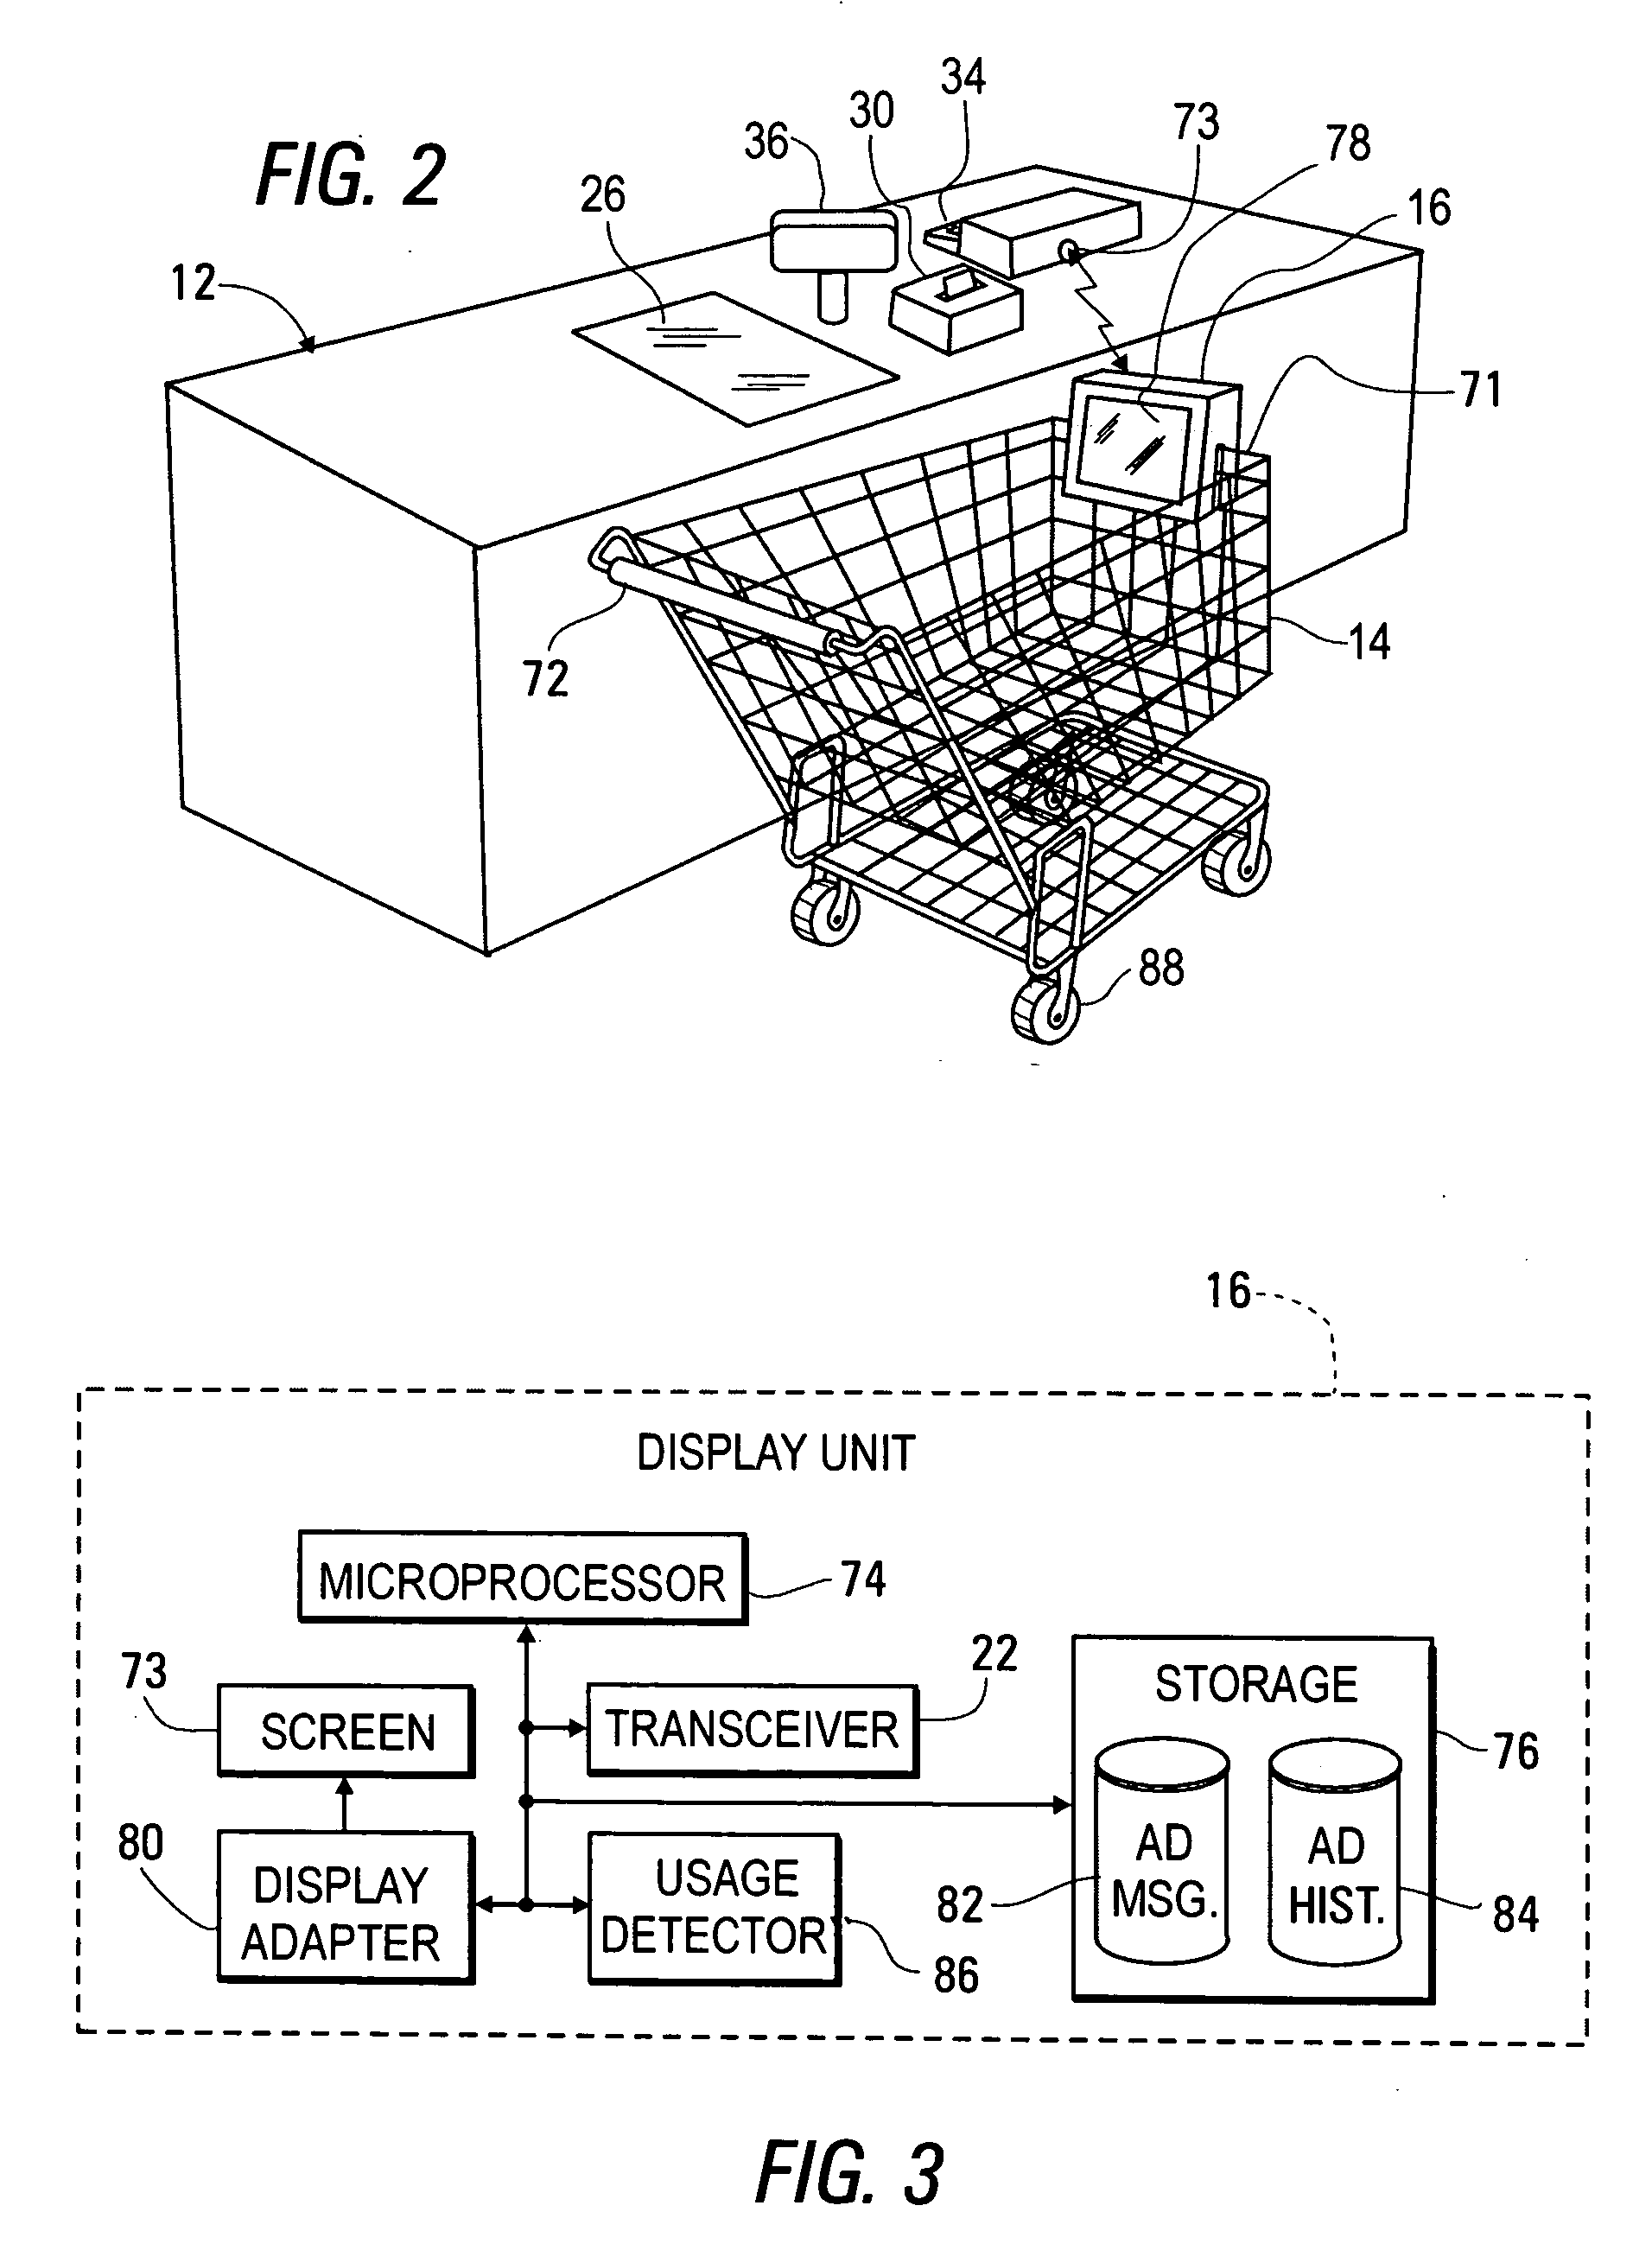 Method and system for measuring effectiveness of shopping cart advertisements based on purchases of advertised items